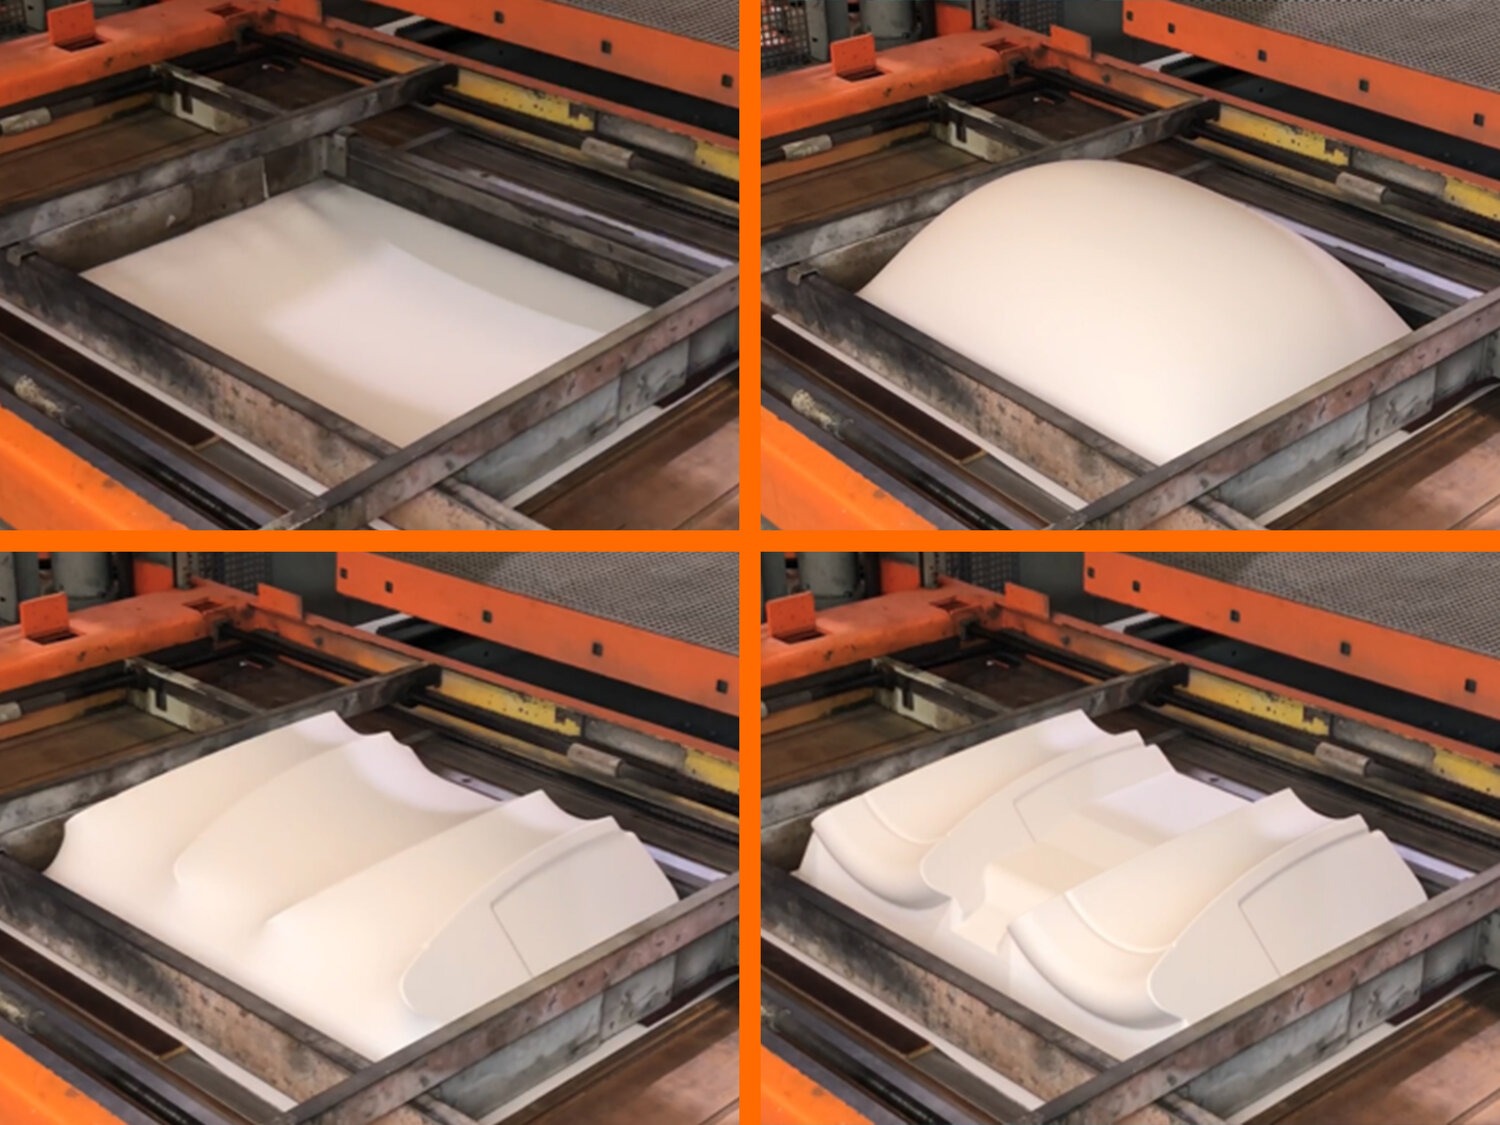 What are the 6 stages of vacuum forming